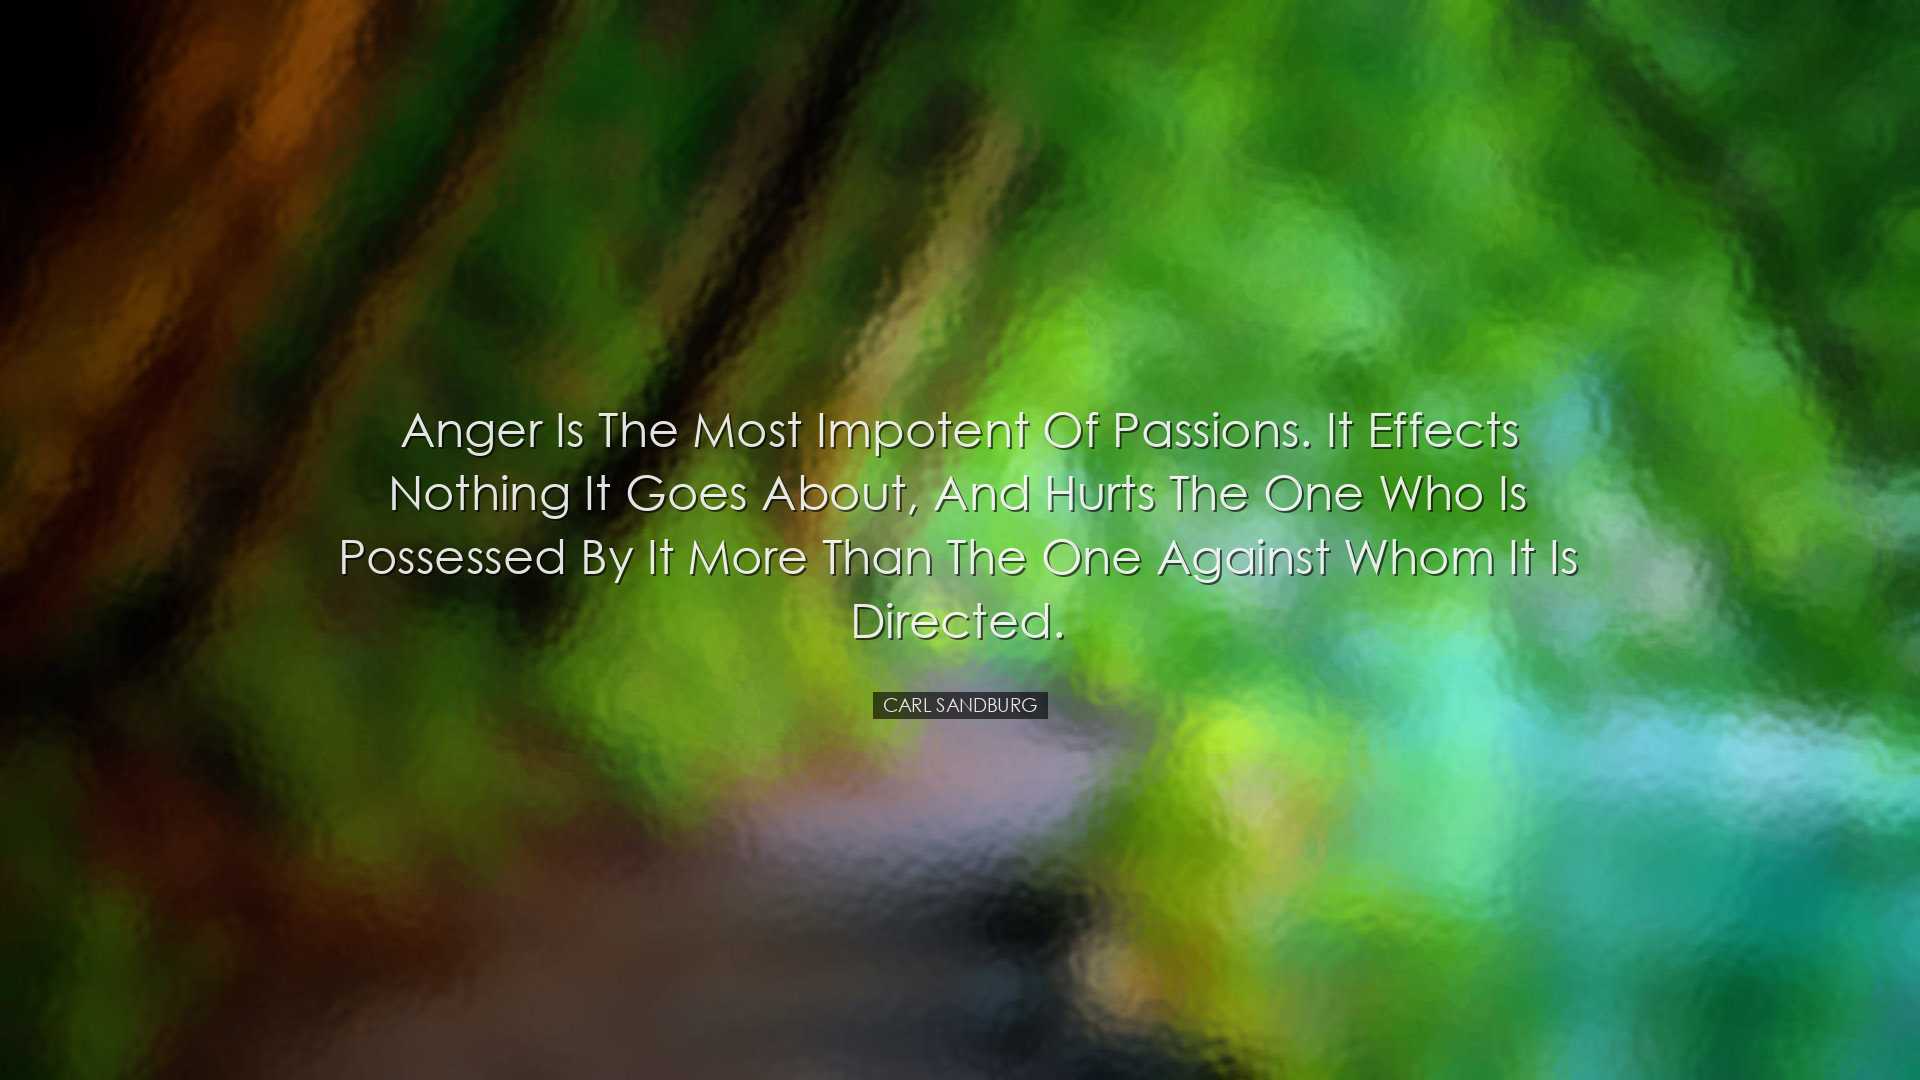 Anger is the most impotent of passions. It effects nothing it goes